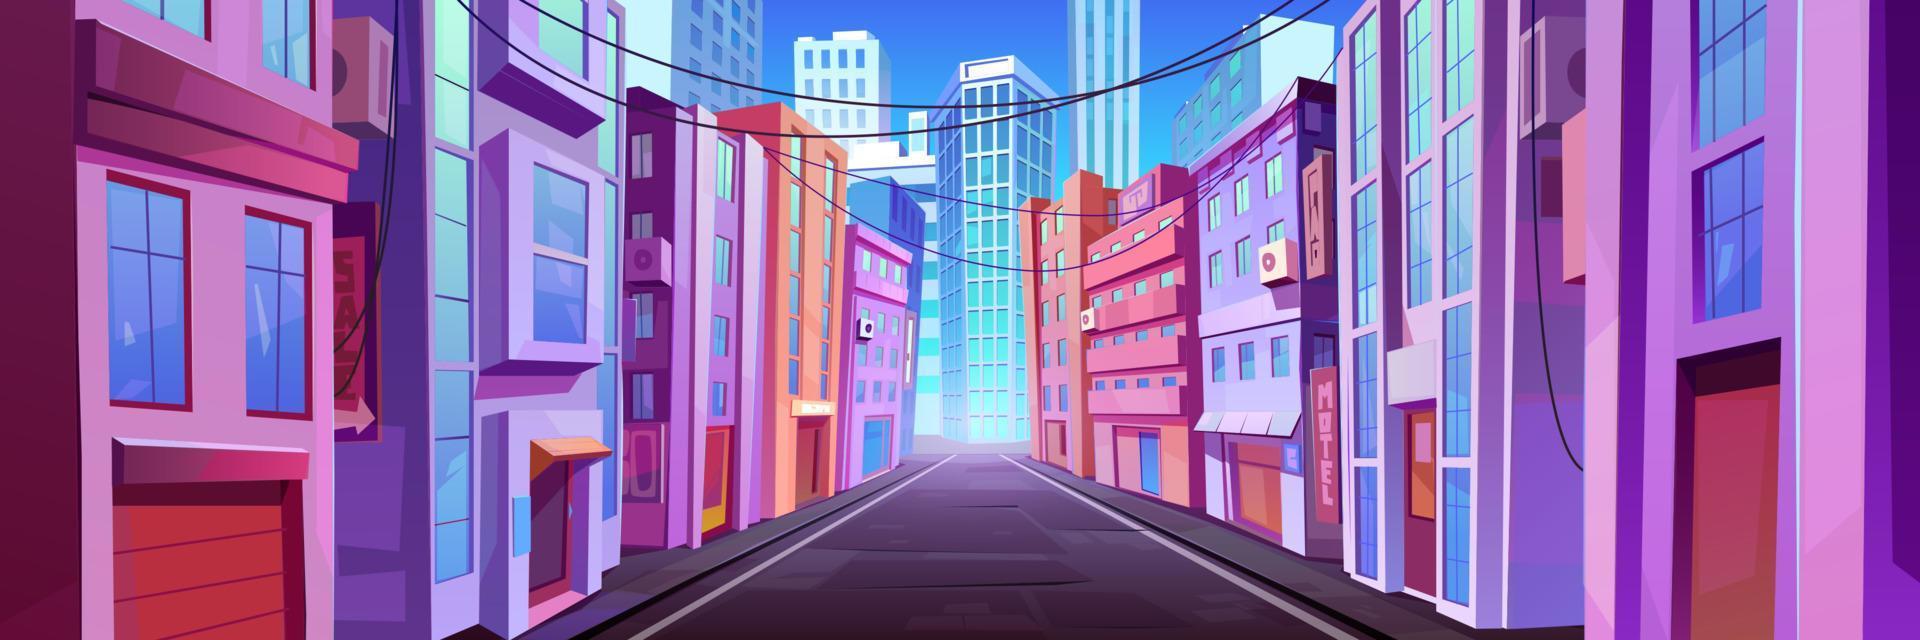 City street with houses and skyscrapers vector